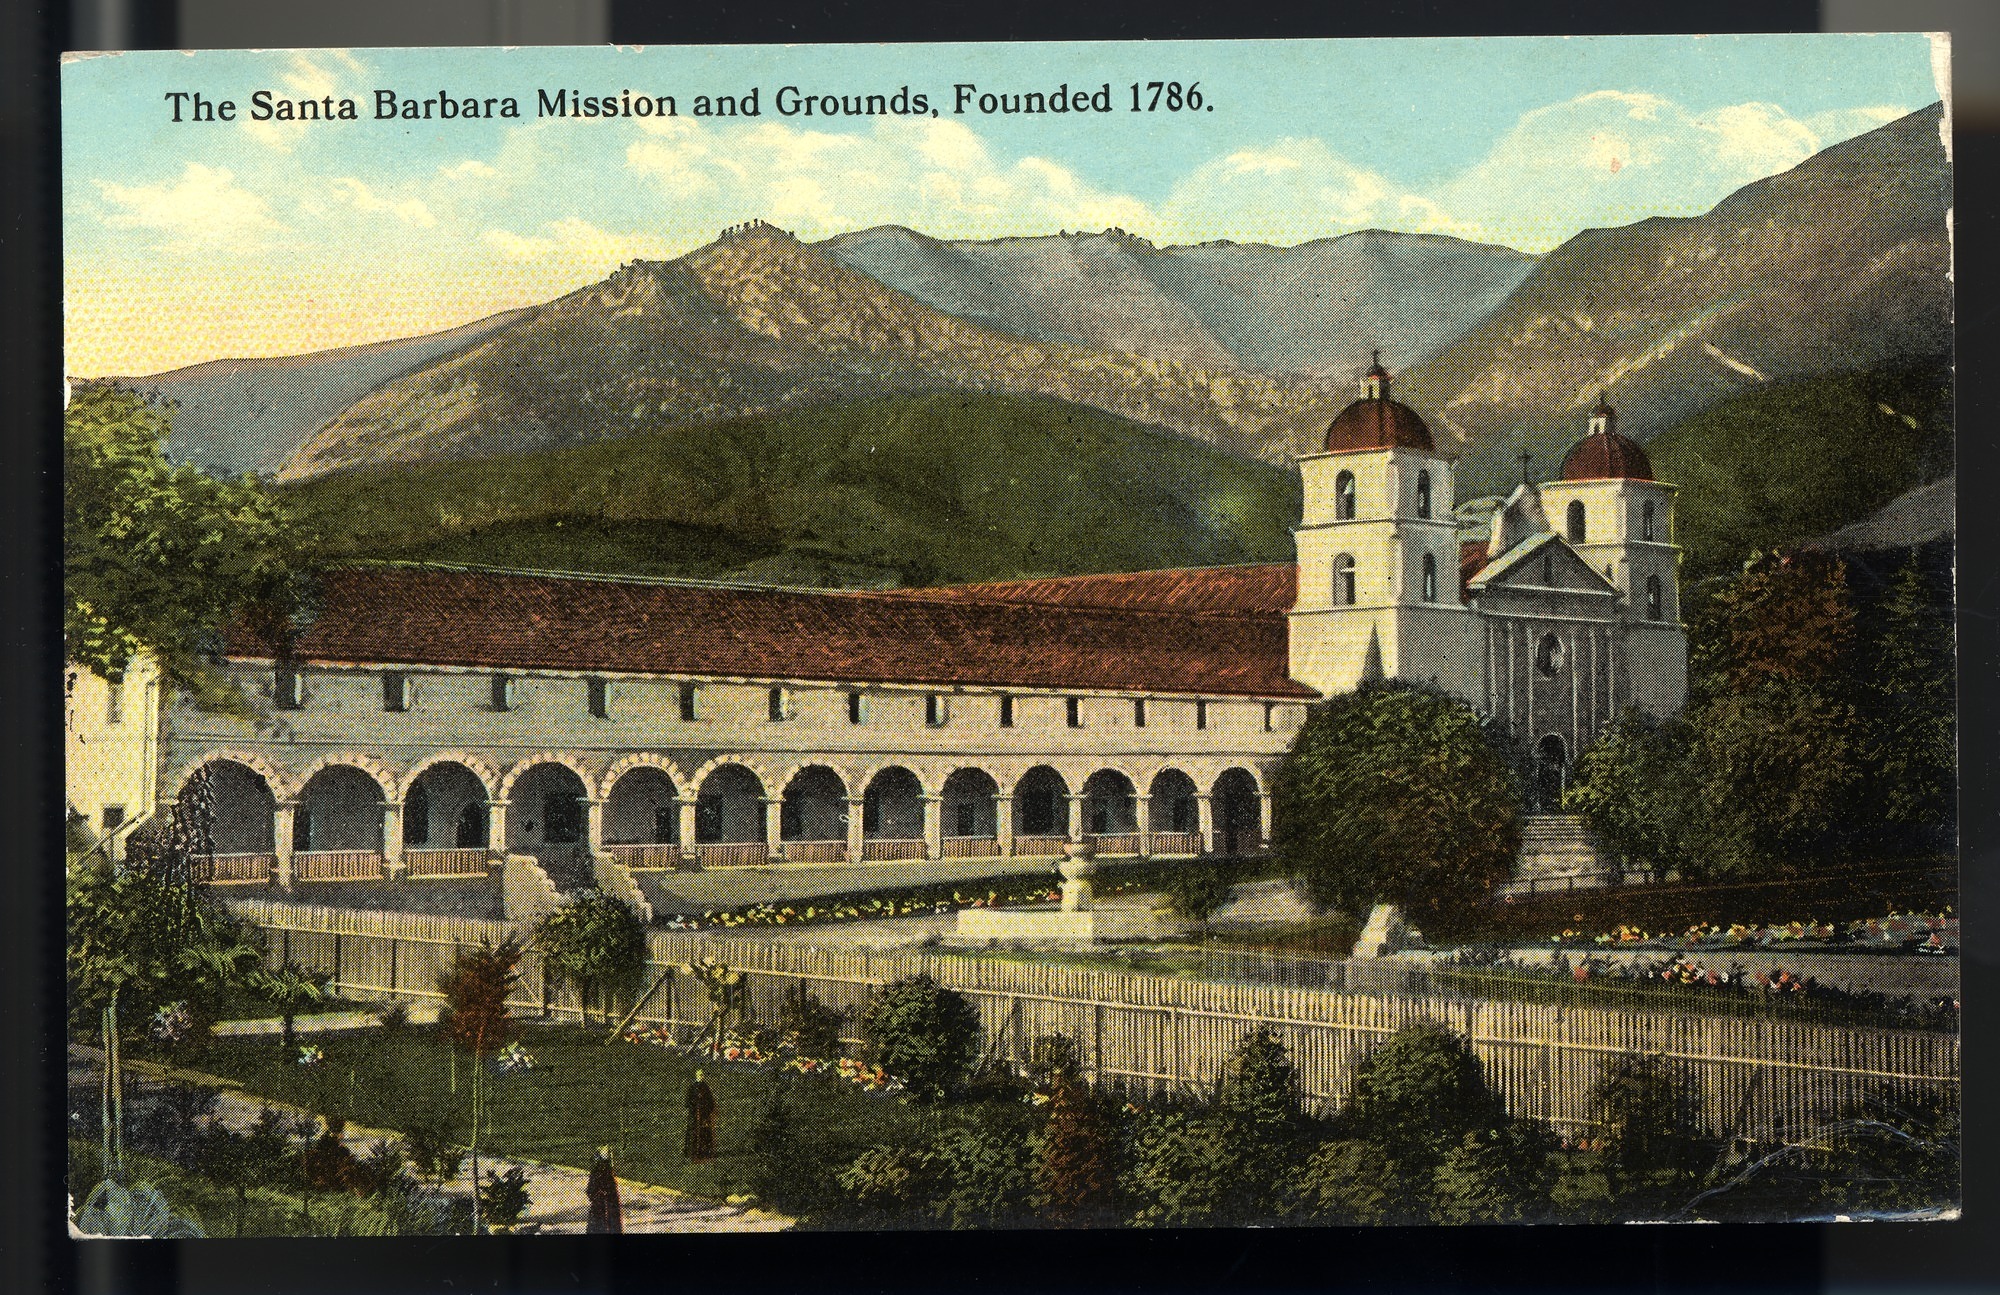 Postcard 36 – The Santa Barbara Mission and Grounds, Founded 1786. Eno & Matteson. Curt Teich Company. ca 1915. NMAH 1986.0639.0597.